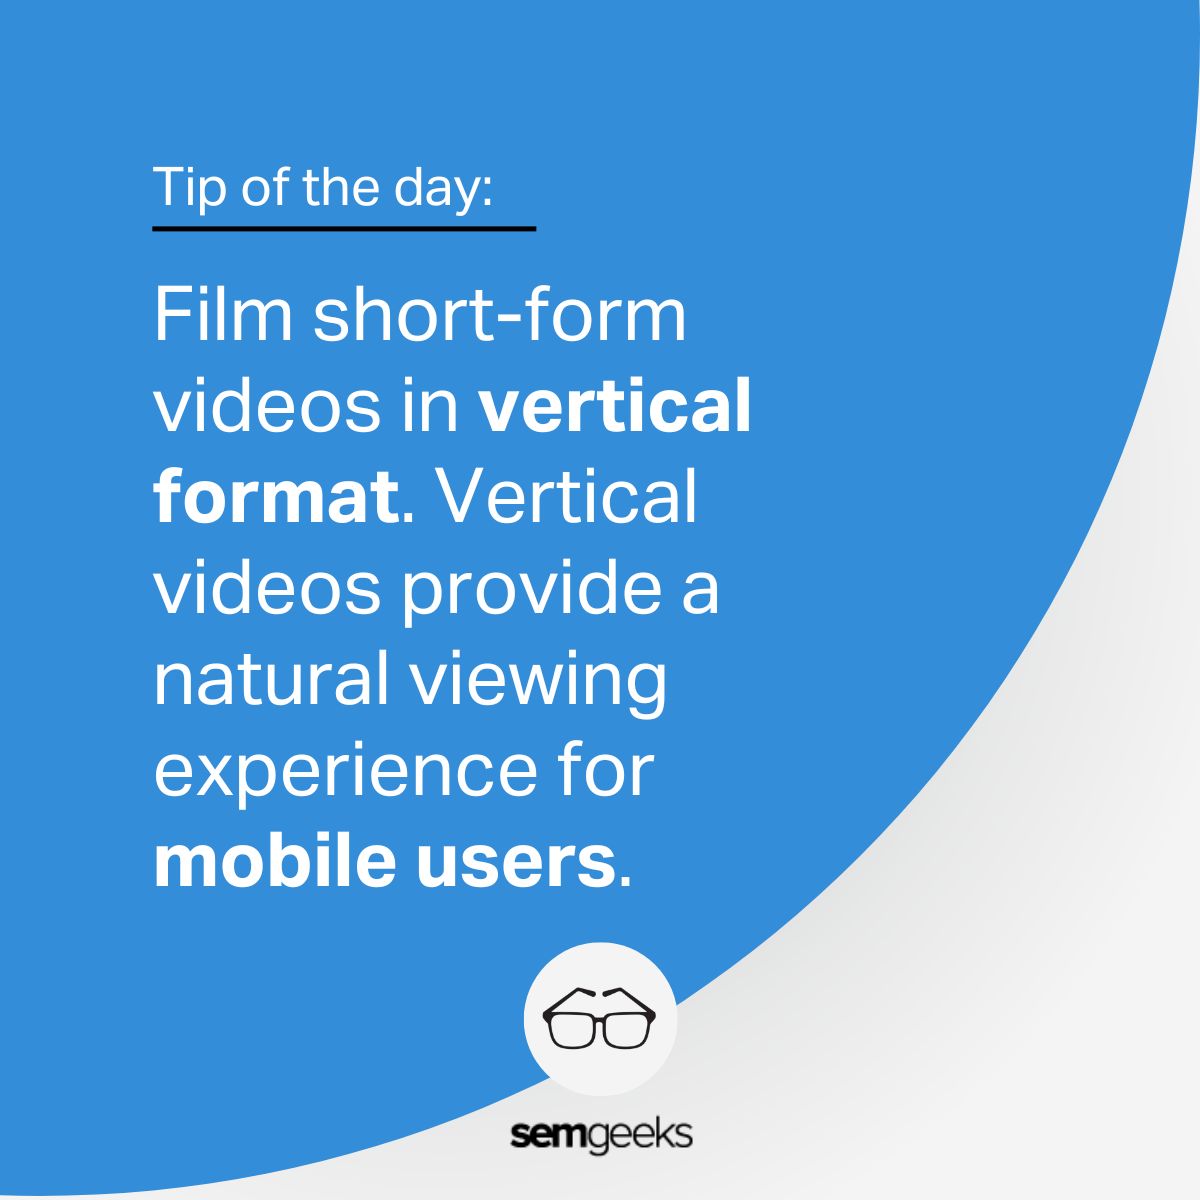 75% of adults in the US watch short-form video content on their mobile devices. That's a massive audience you can't afford to ignore! It is all about keeping mobile viewers glued to their screens. Start by filming your videos in portrait format.  
#MobileMarketing #VideoContent